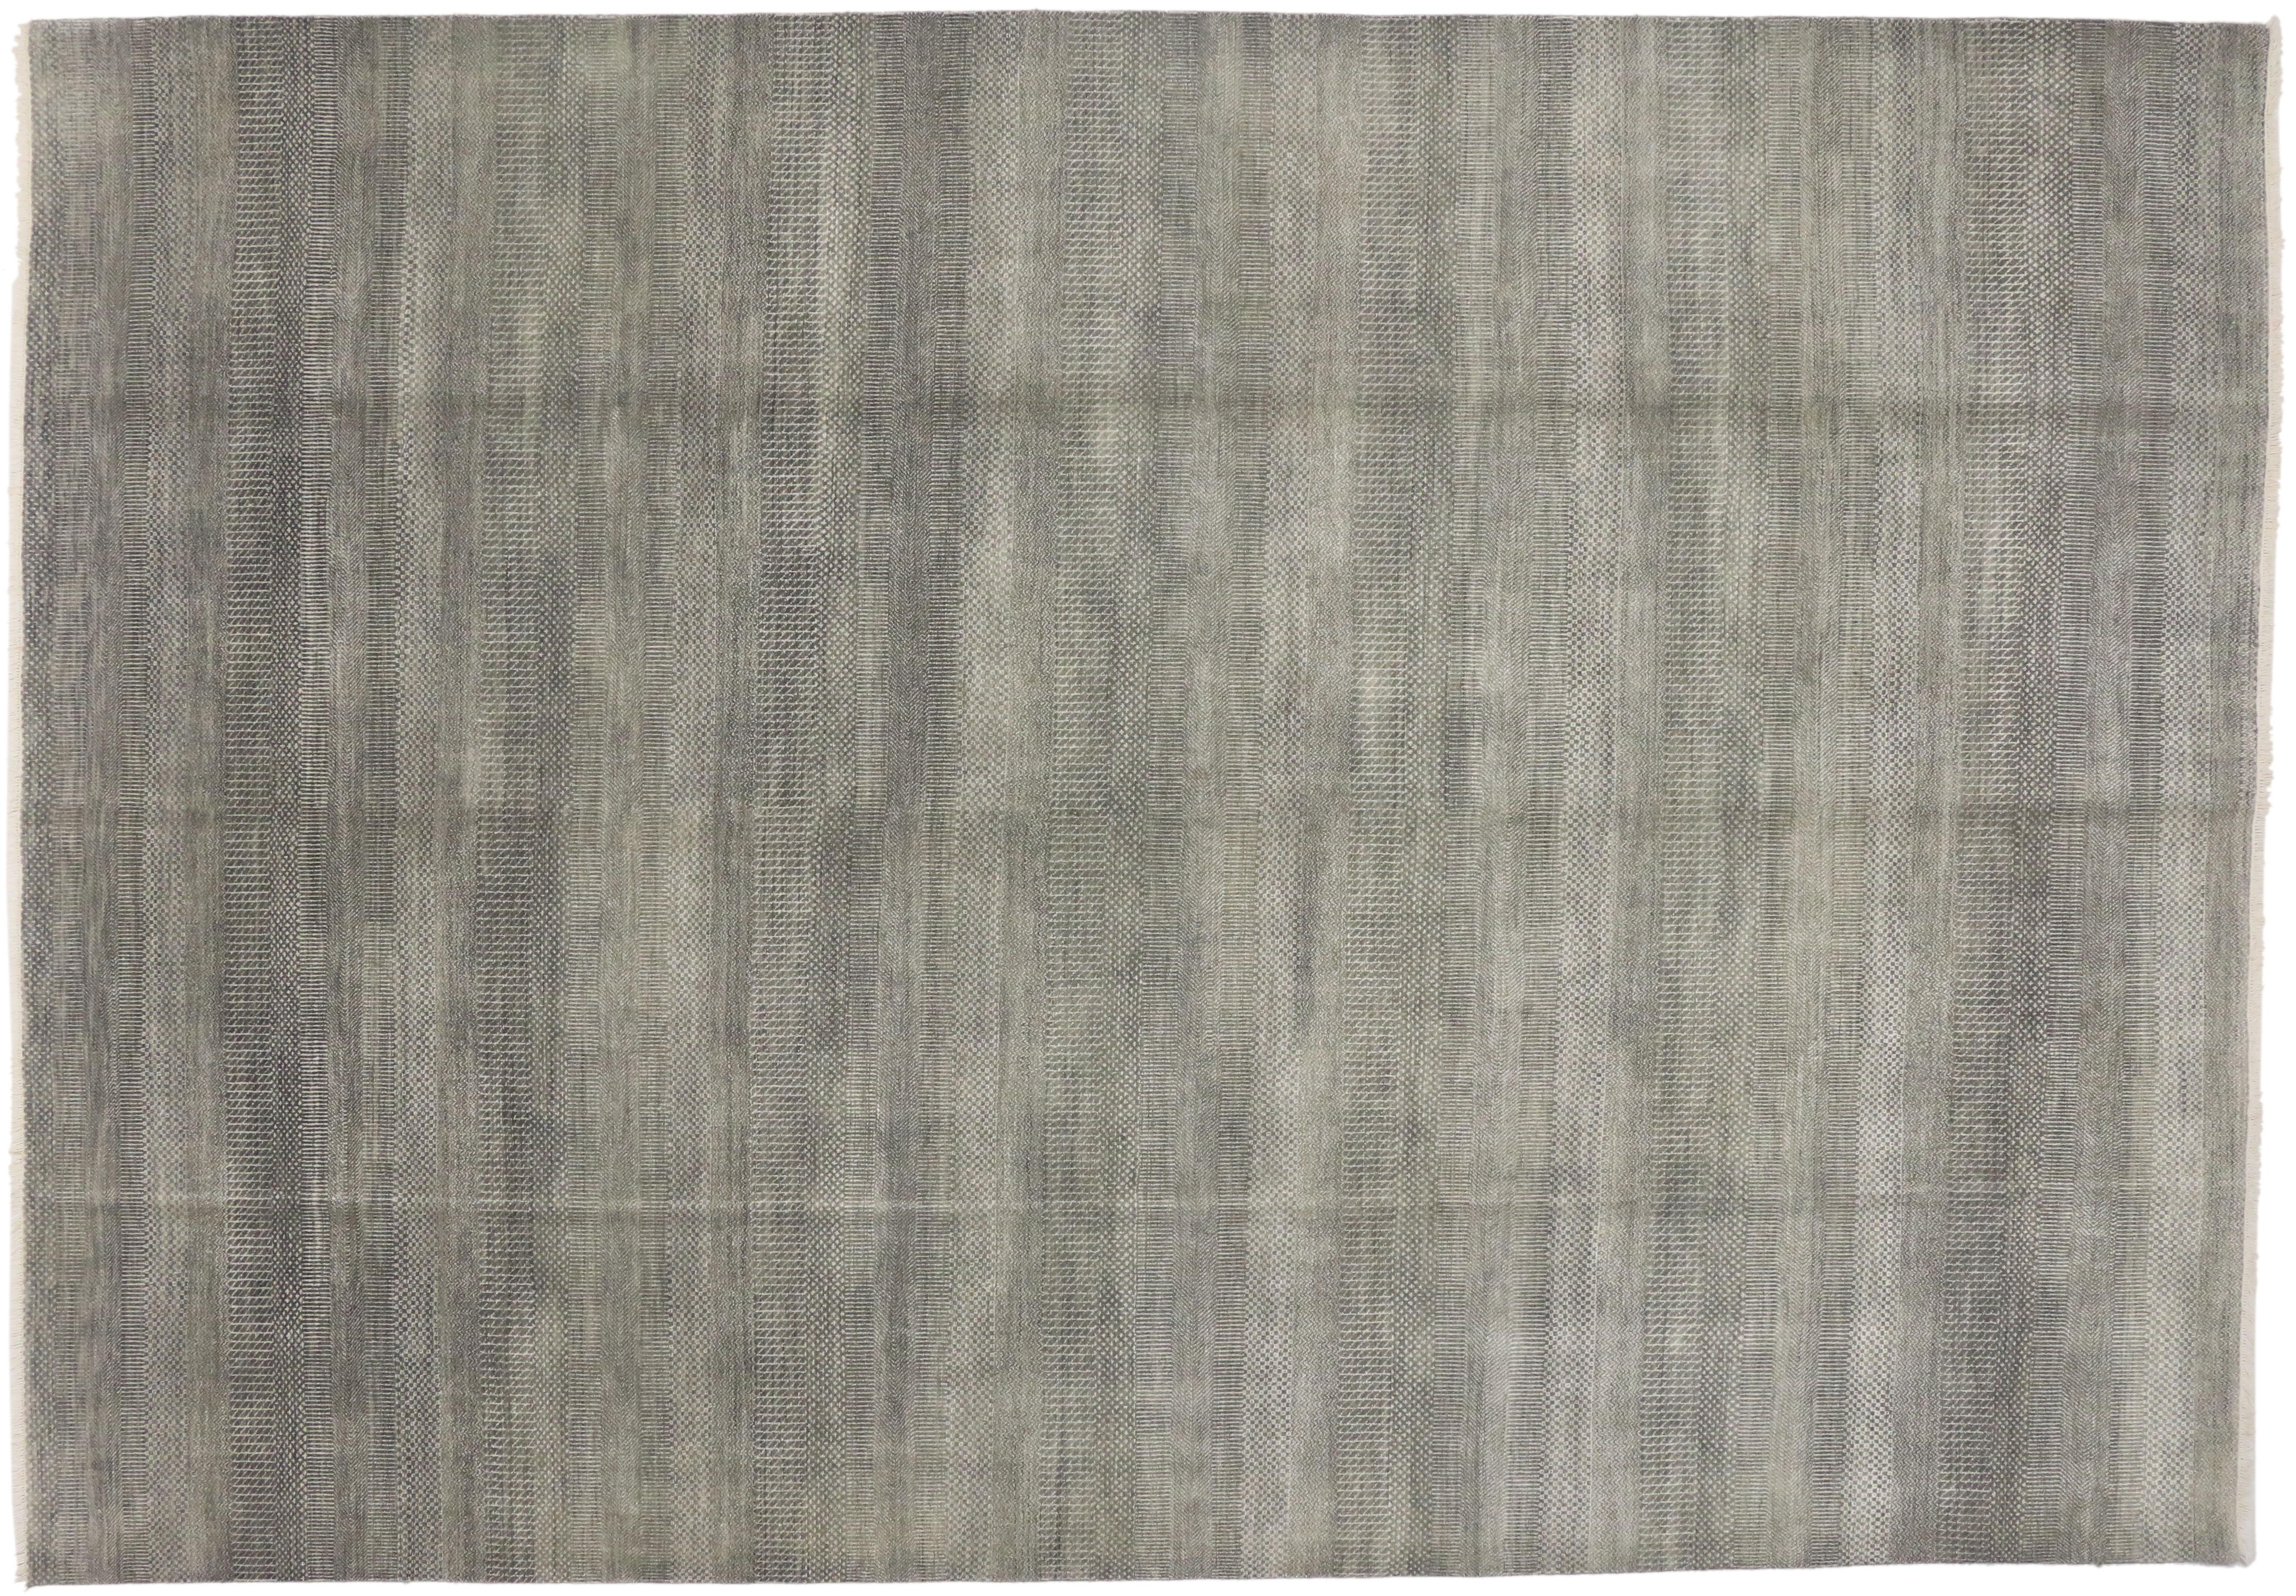 30014 Transitional Gray Area Rug with Minimalist Style, Contemporary Bauhaus Design 09'10 x 14'02. Striking in its style and delicate beauty, this transitional gray area rug features a subtle geometric pattern with contemporary minimalist style. The